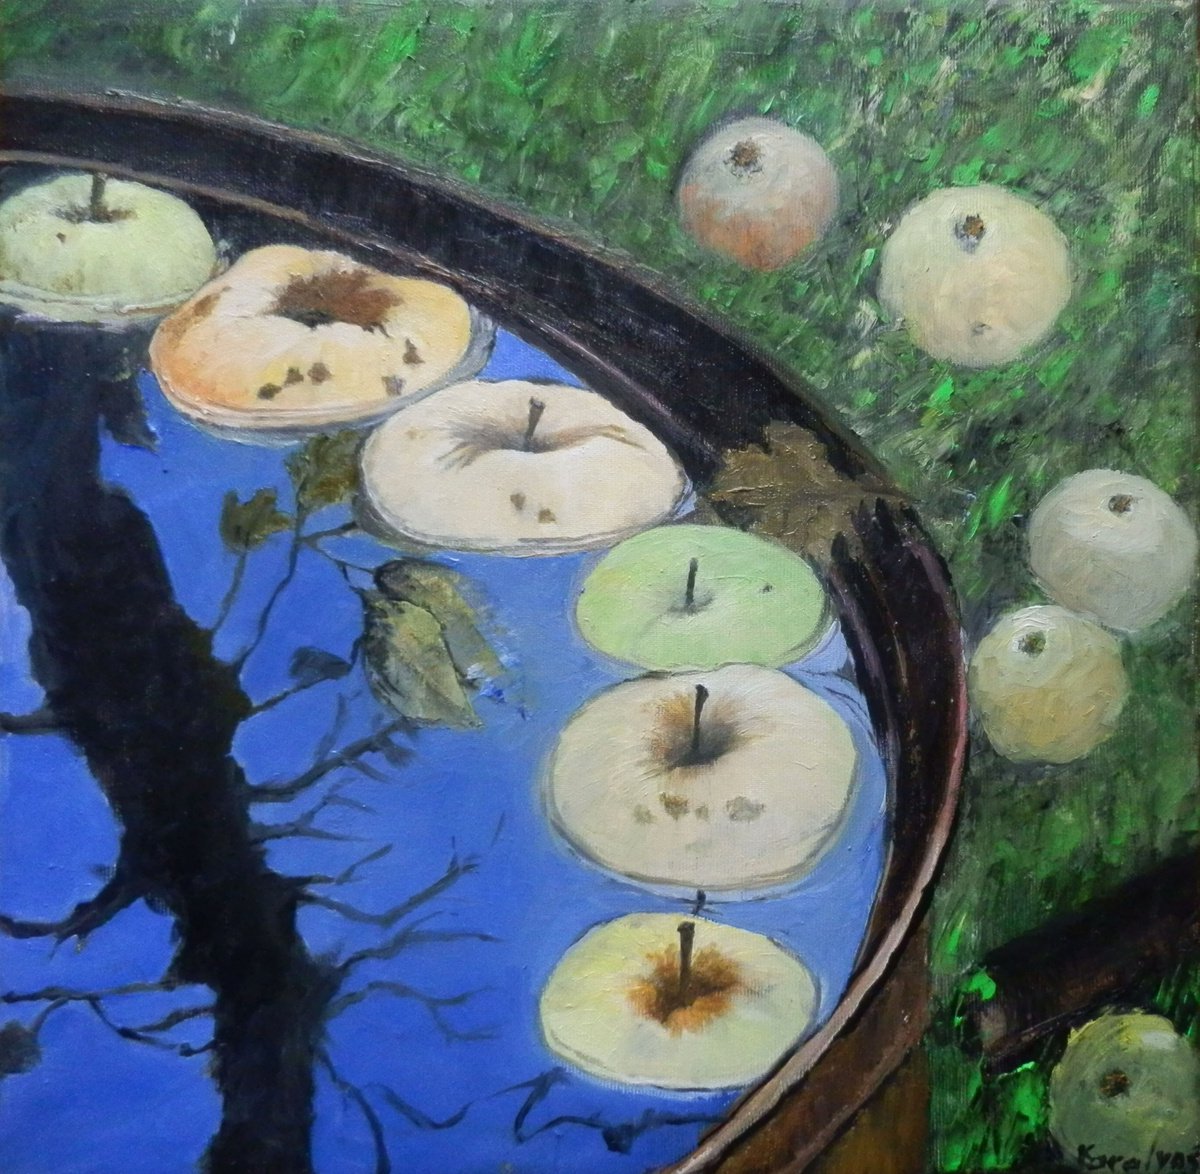 Apples in the water barrel by Maria Karalyos